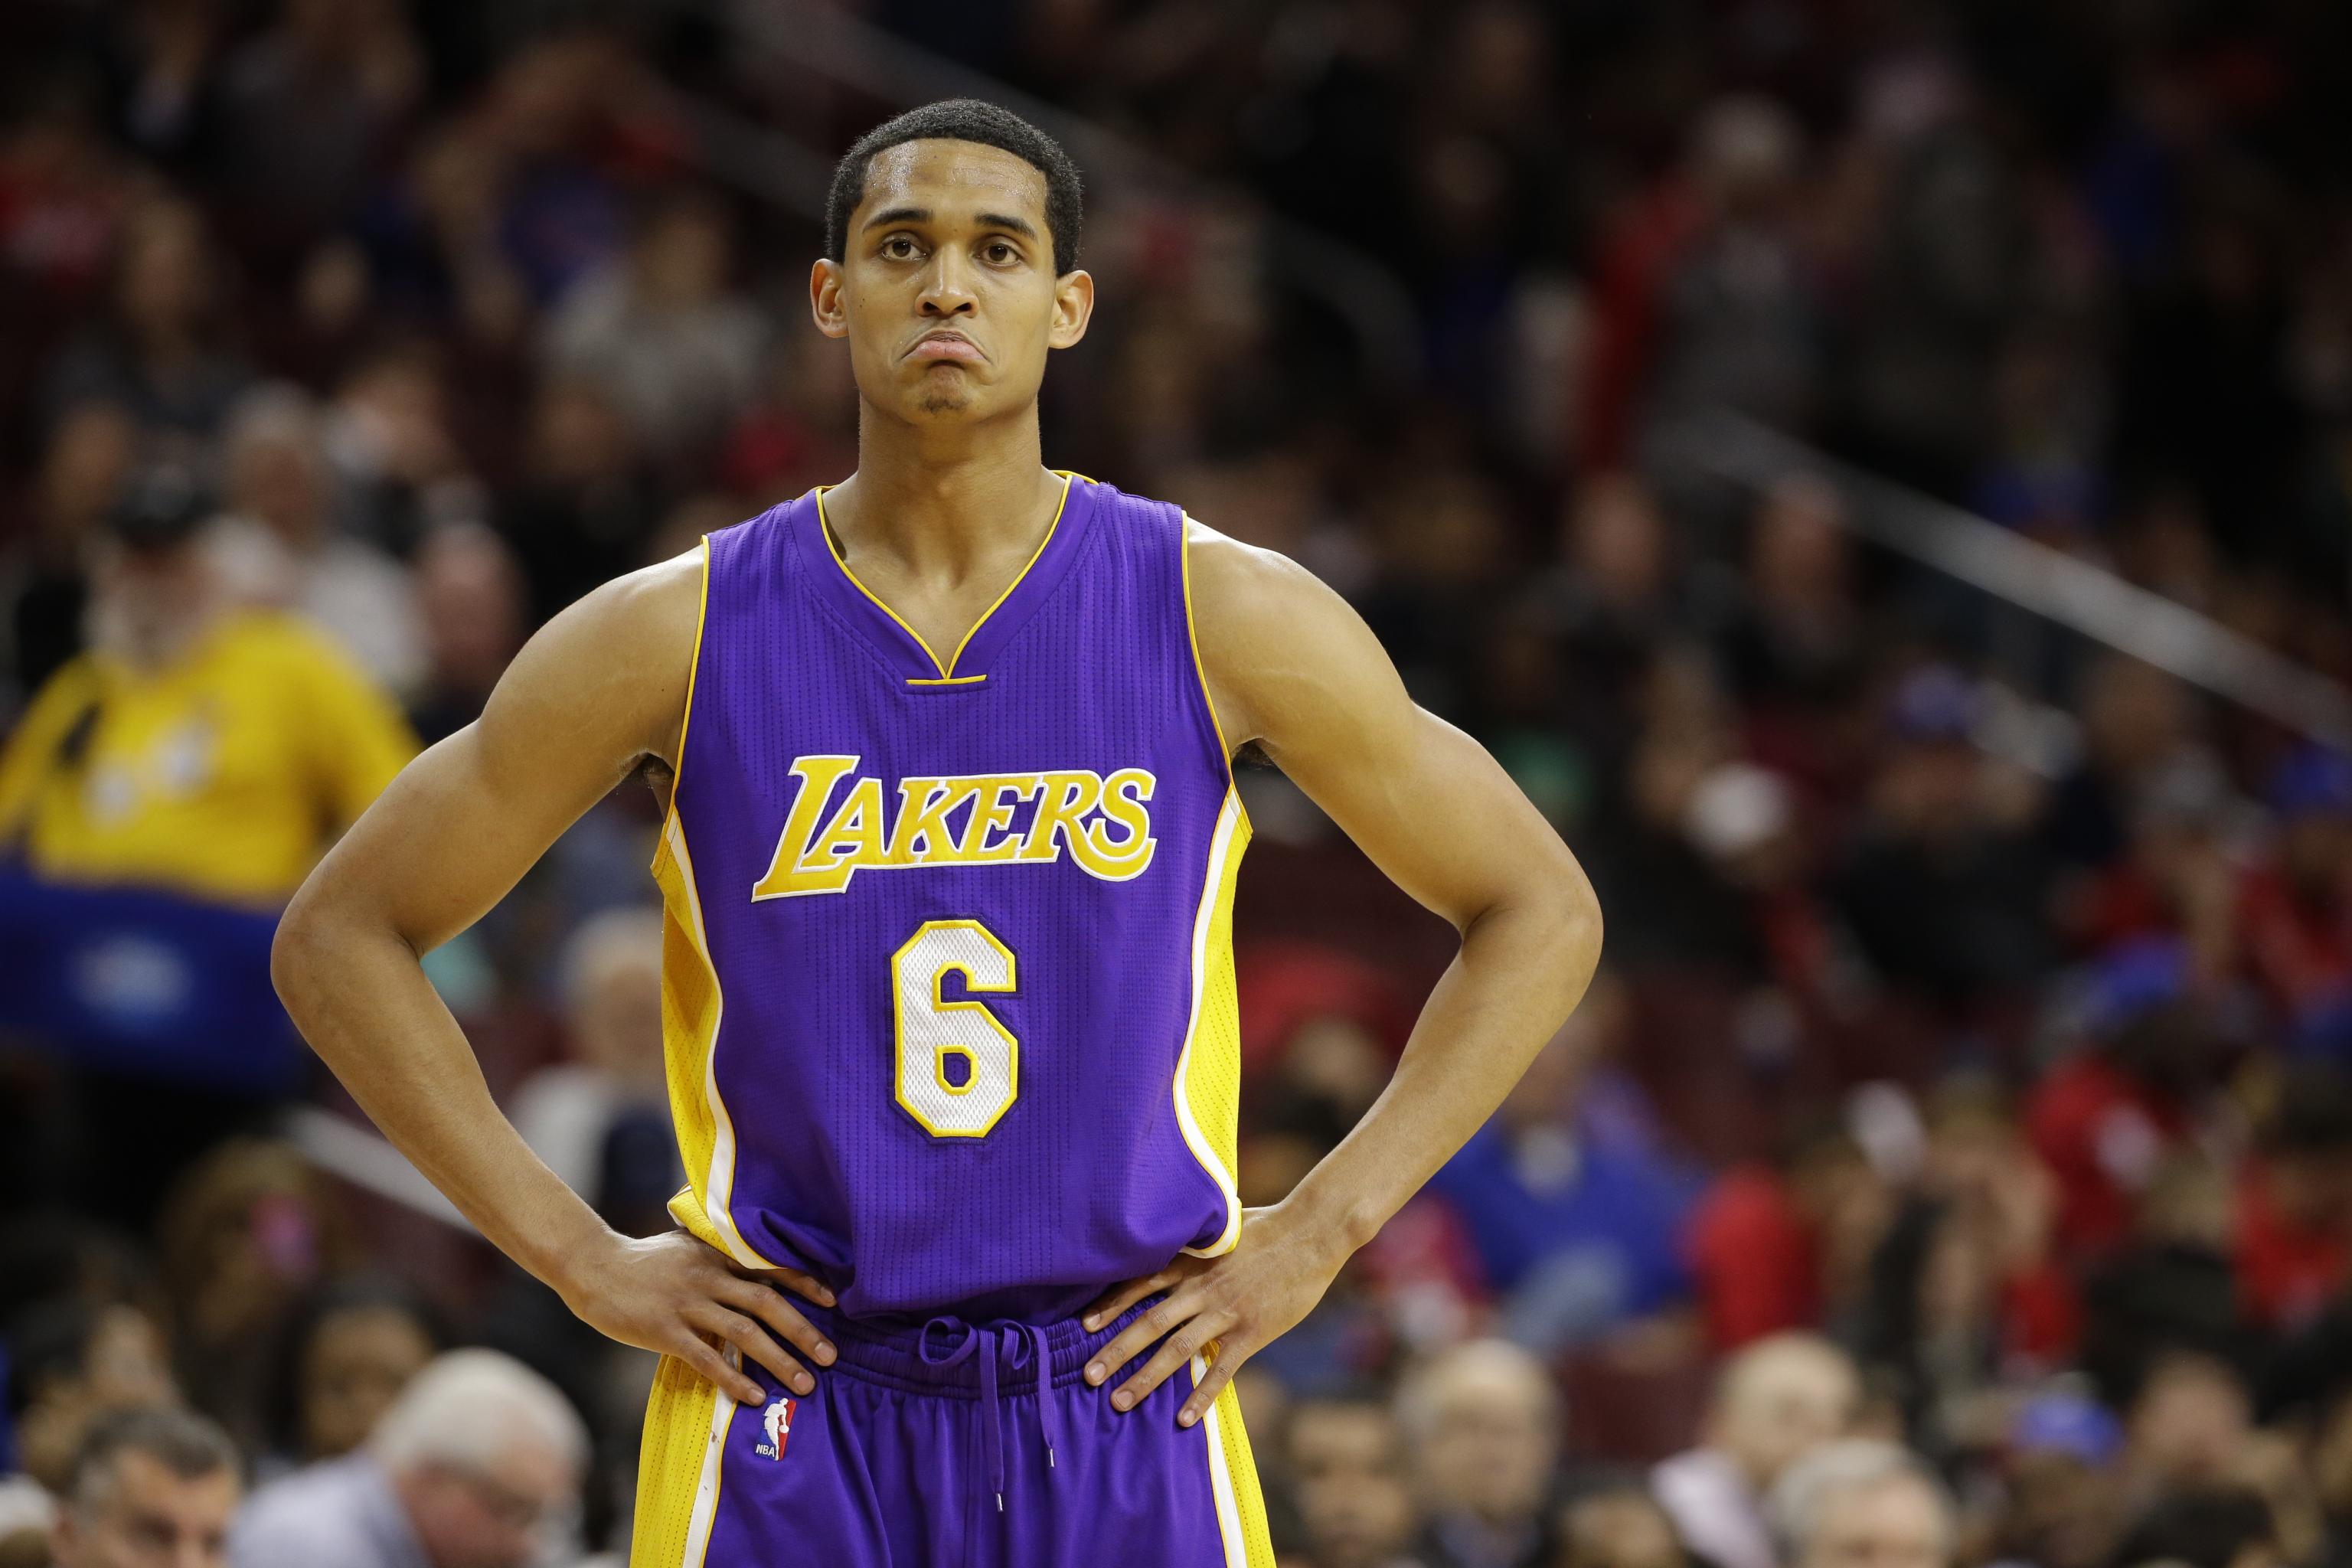 Could The Lakers No. 6 Jordan Clarkson Be 'Sixth Man Of The Year